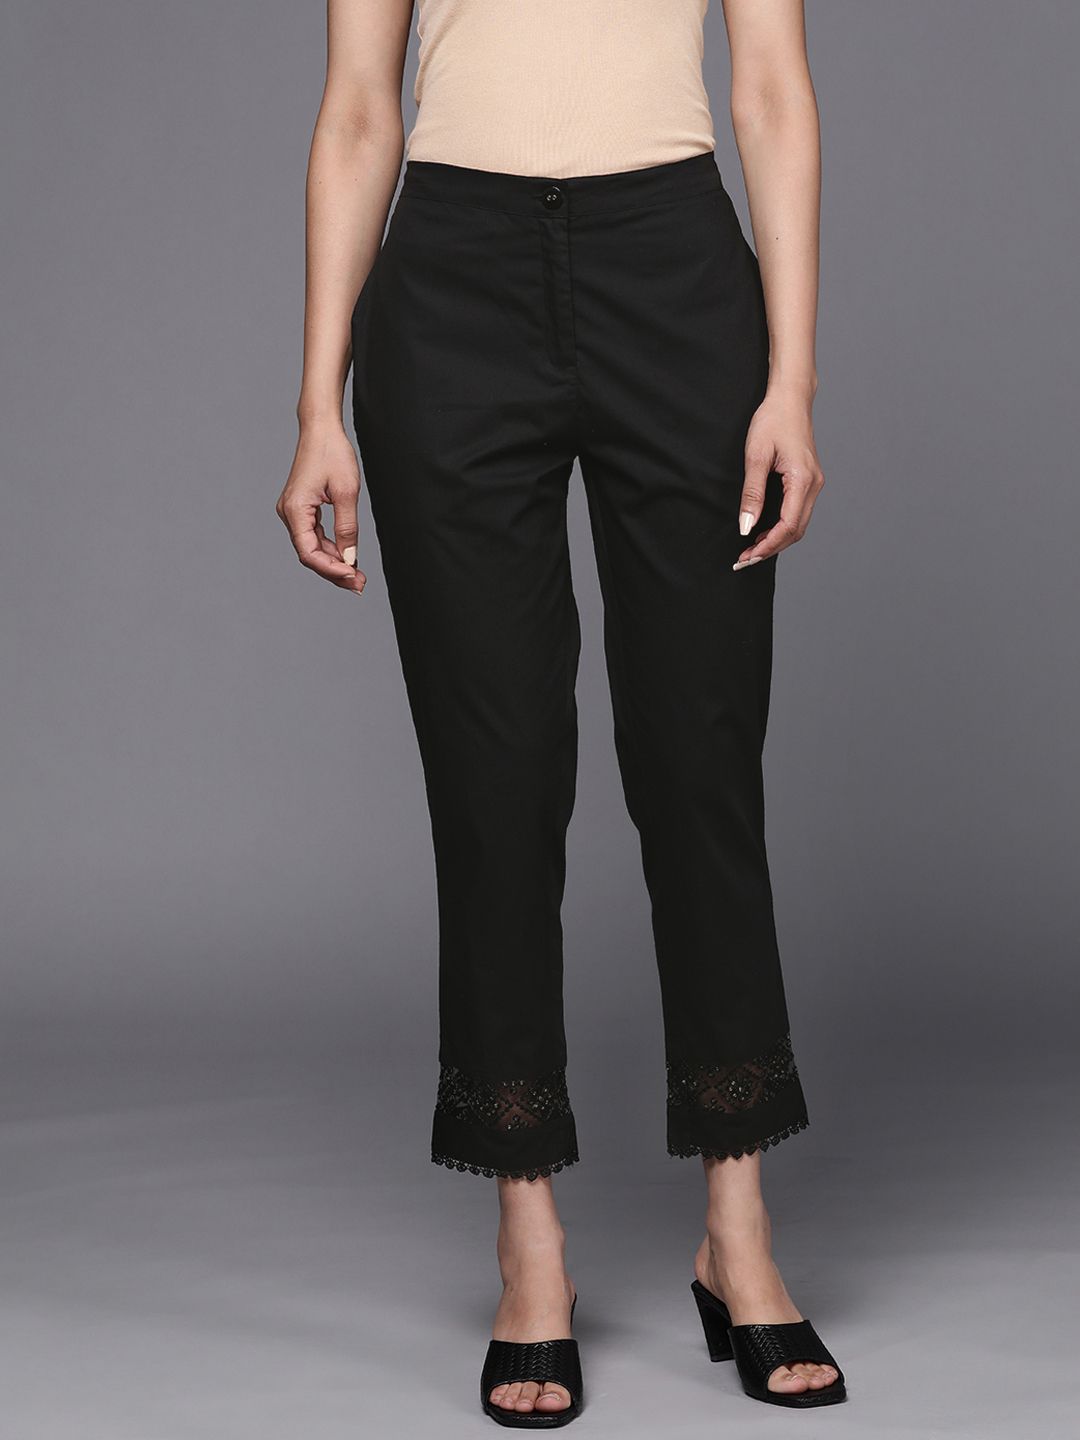 Libas Women Black Pure Cotton Trousers with Lace Details at Hem Price in India